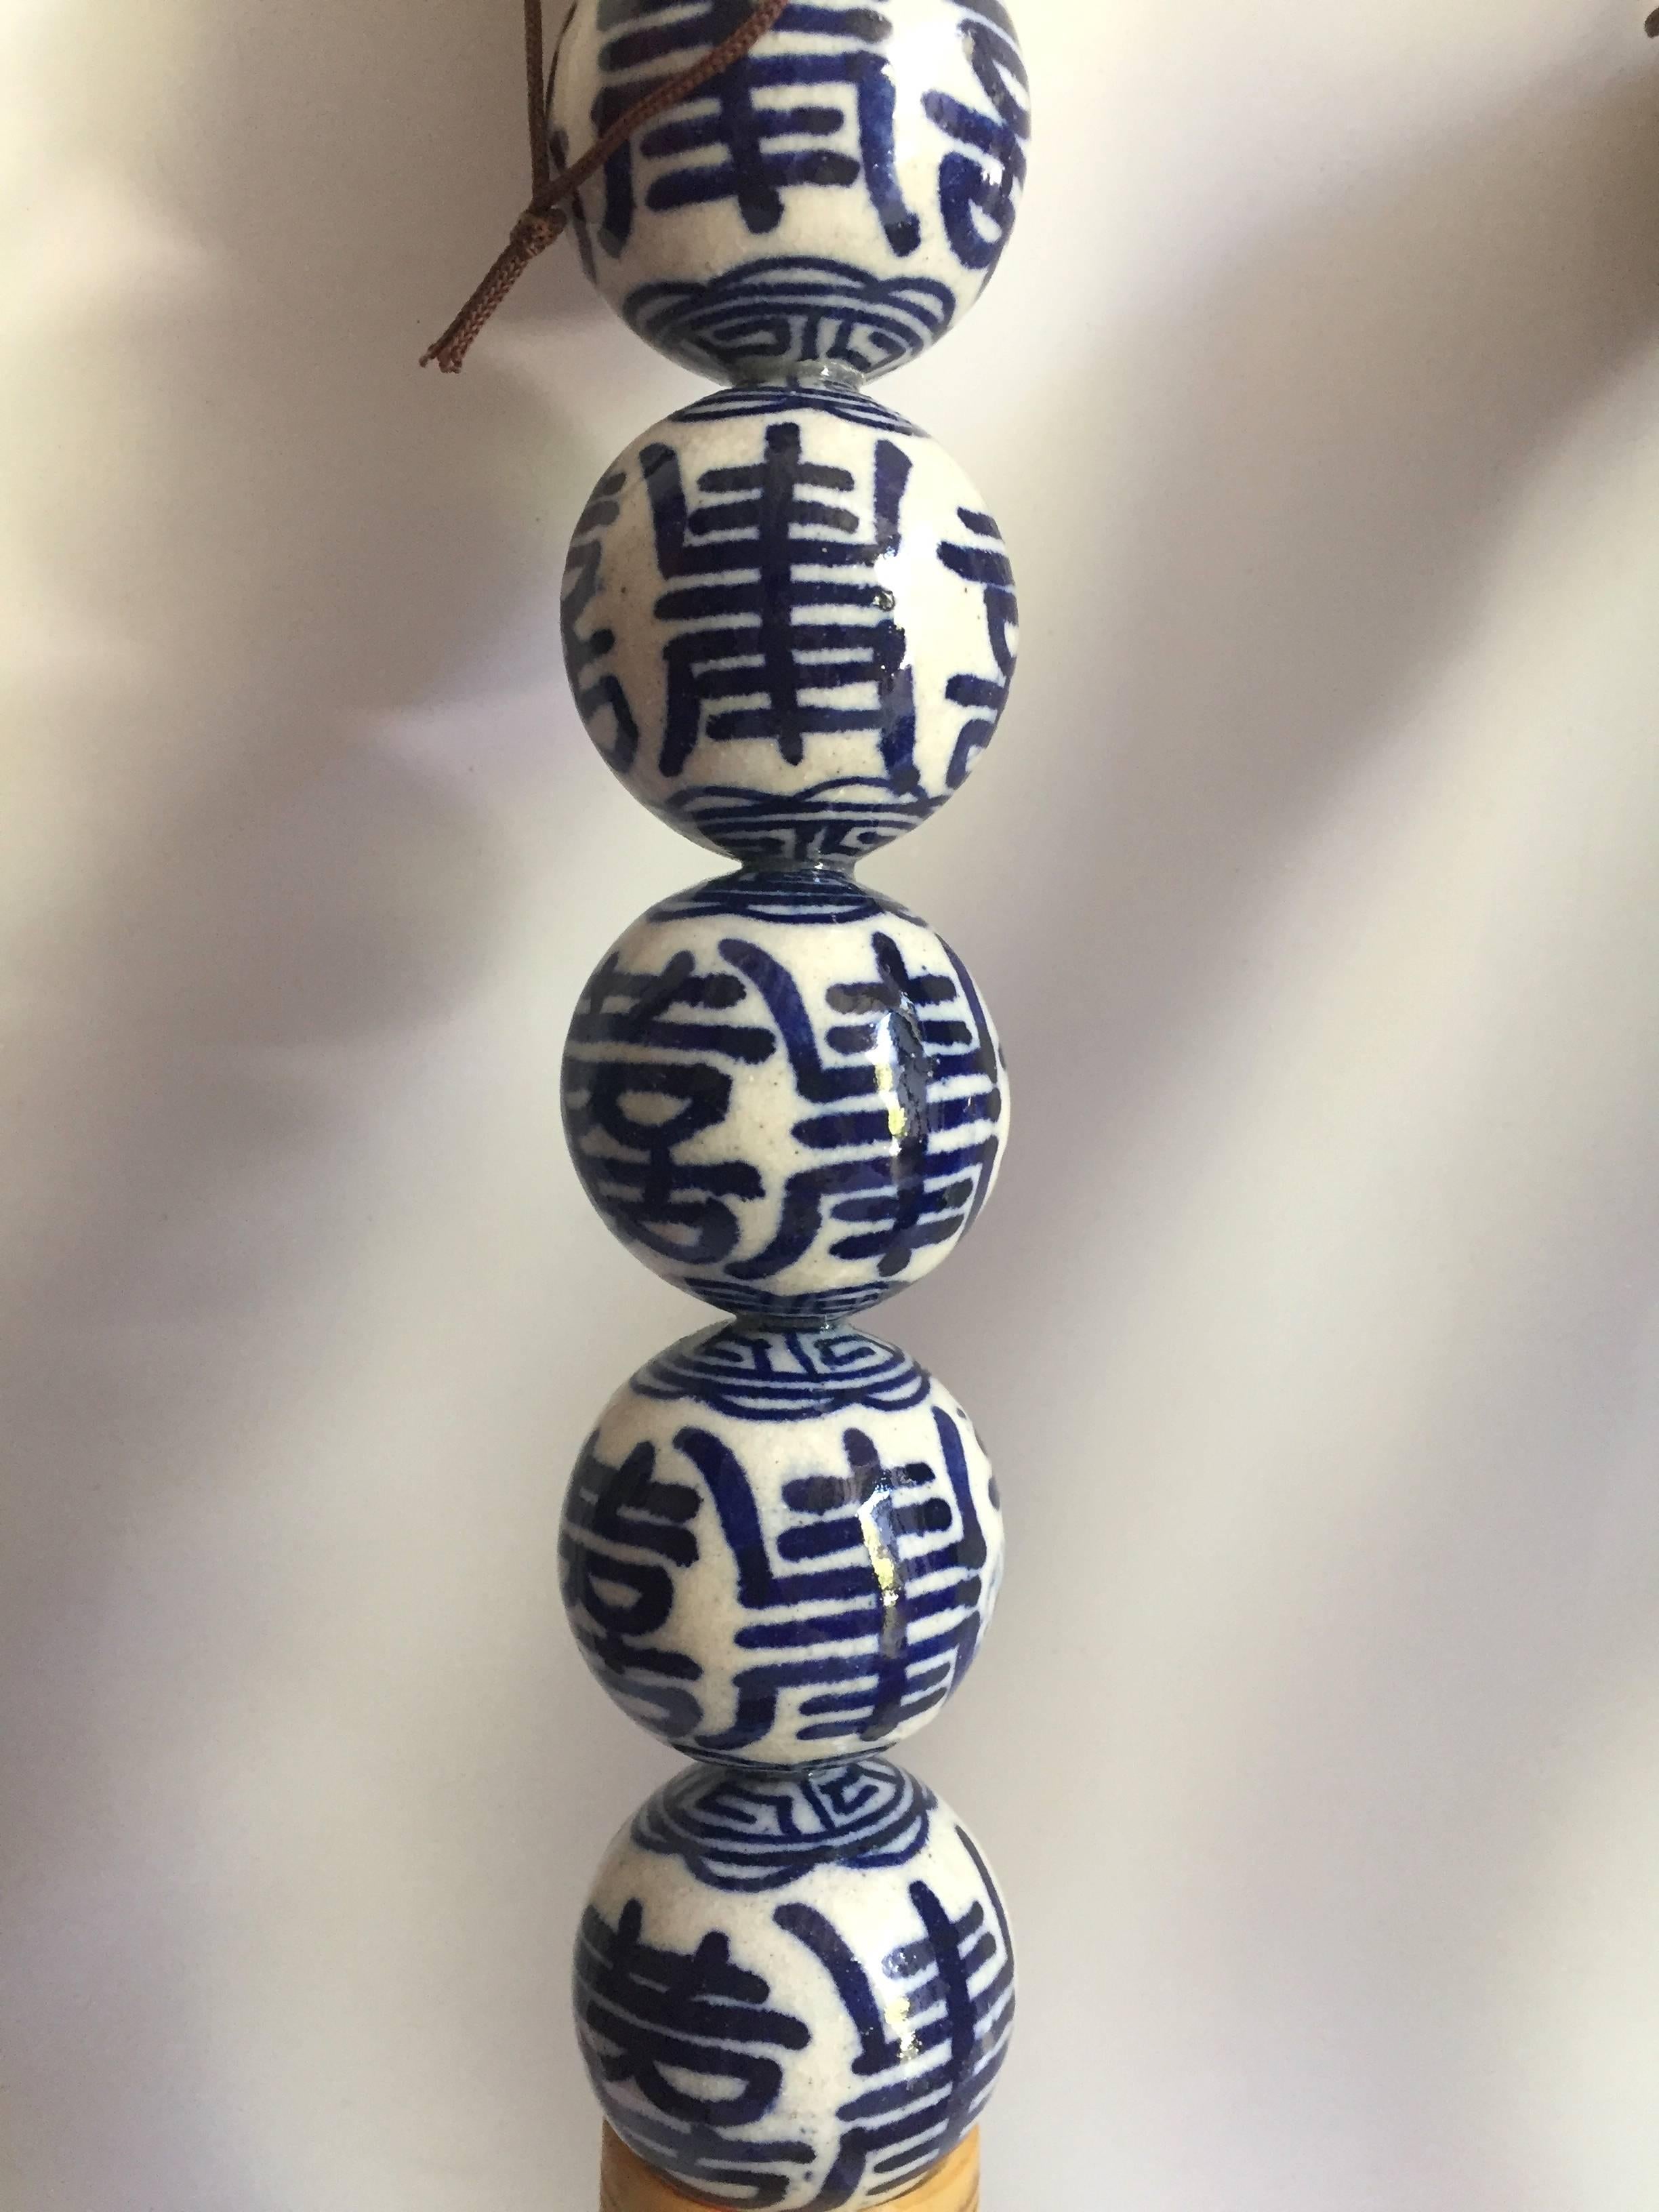 Our new collection of brushes are beautiful. Featured here a set of 3 pieces, two in stone, one in porcelain. The blue and white porcelain balls have the symbols of longevity hand painted on them. These brushes make stunning displays, can be used to